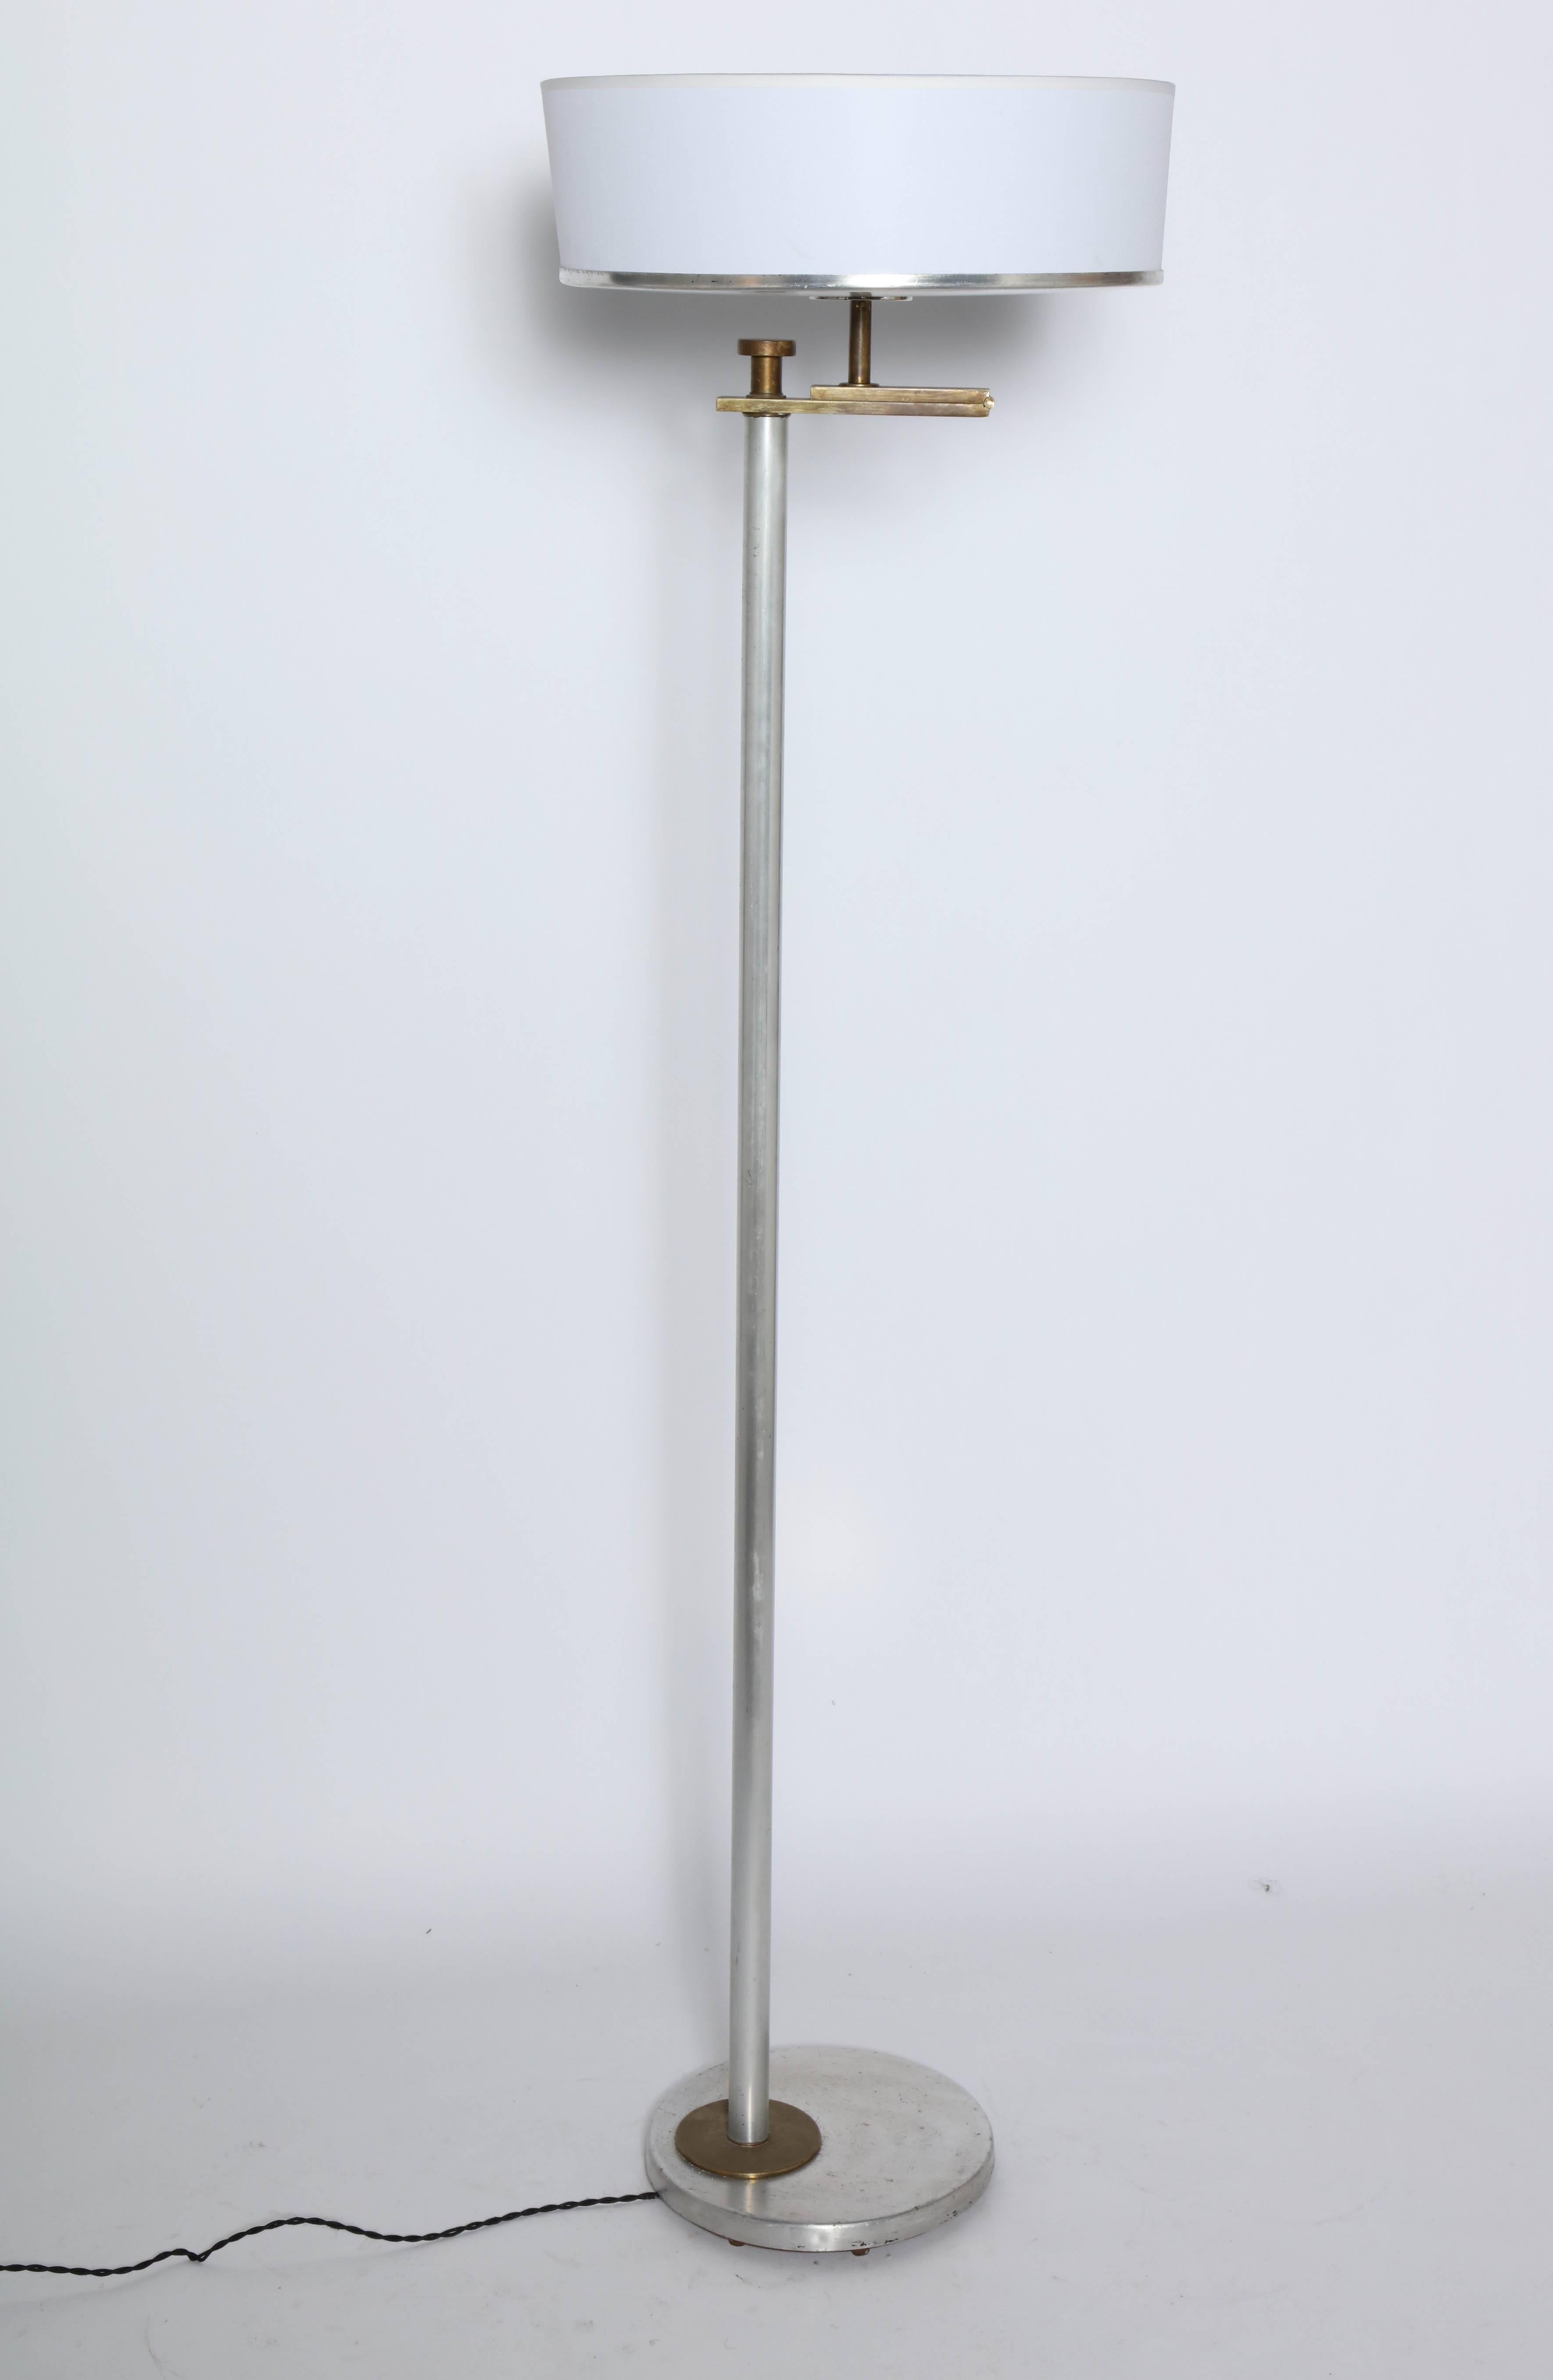 Modernist Kurt Versen Brushed Aluminum and Brass Flip Top Reading Floor Lamp. Featuring Brushed Aluminum column, cap and base, Brass arm and disc detail with new White Parchment Shade. Shade designed for use in upward or downward position.